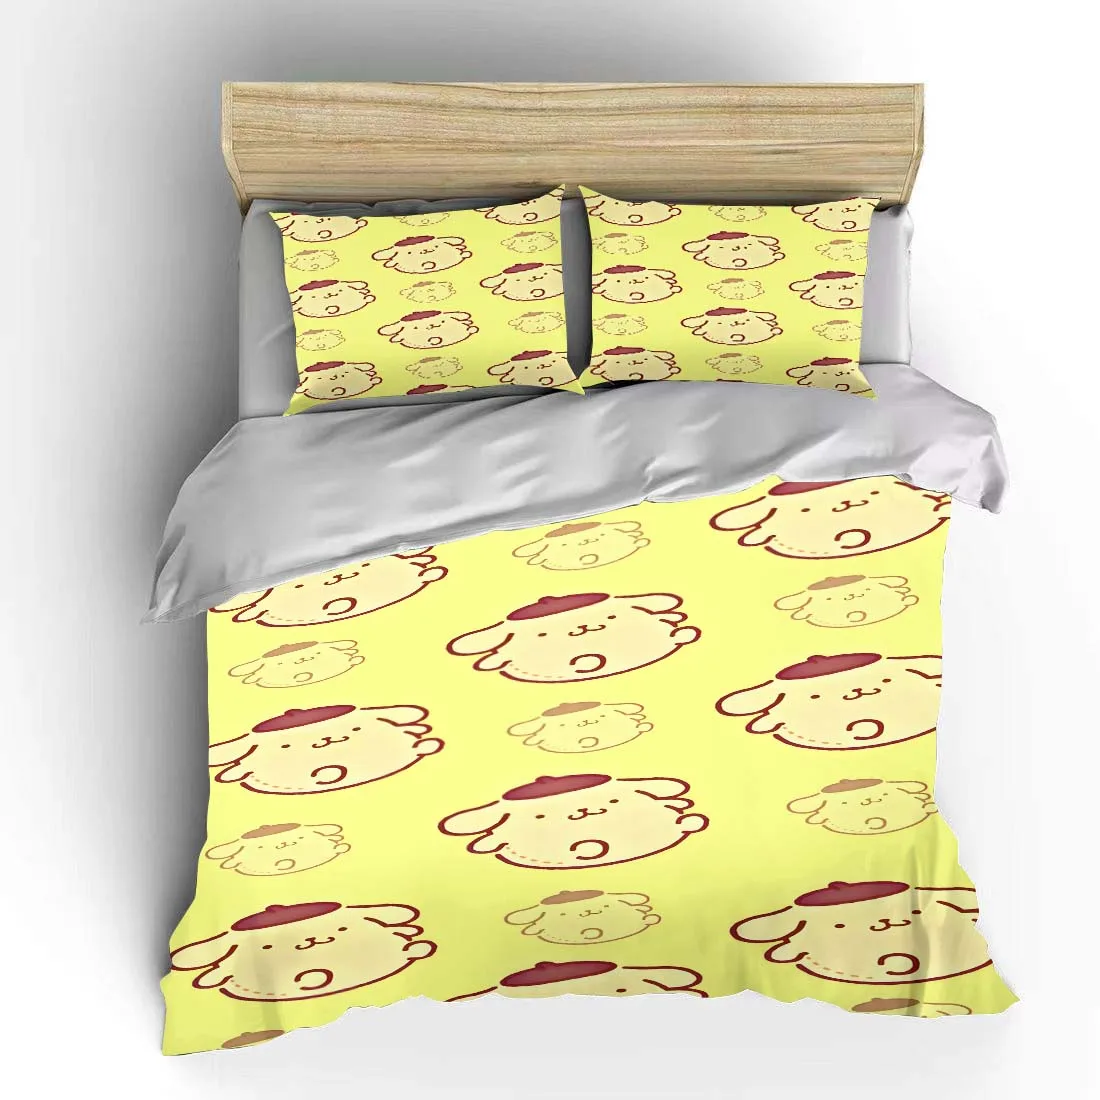 

Pom Pom Purin Cartoon Bedding Set Children 3 Pieces Set King Size Baby Boy Bed Set US Twin Adult Bed Cover Bedroom Duvet Gift